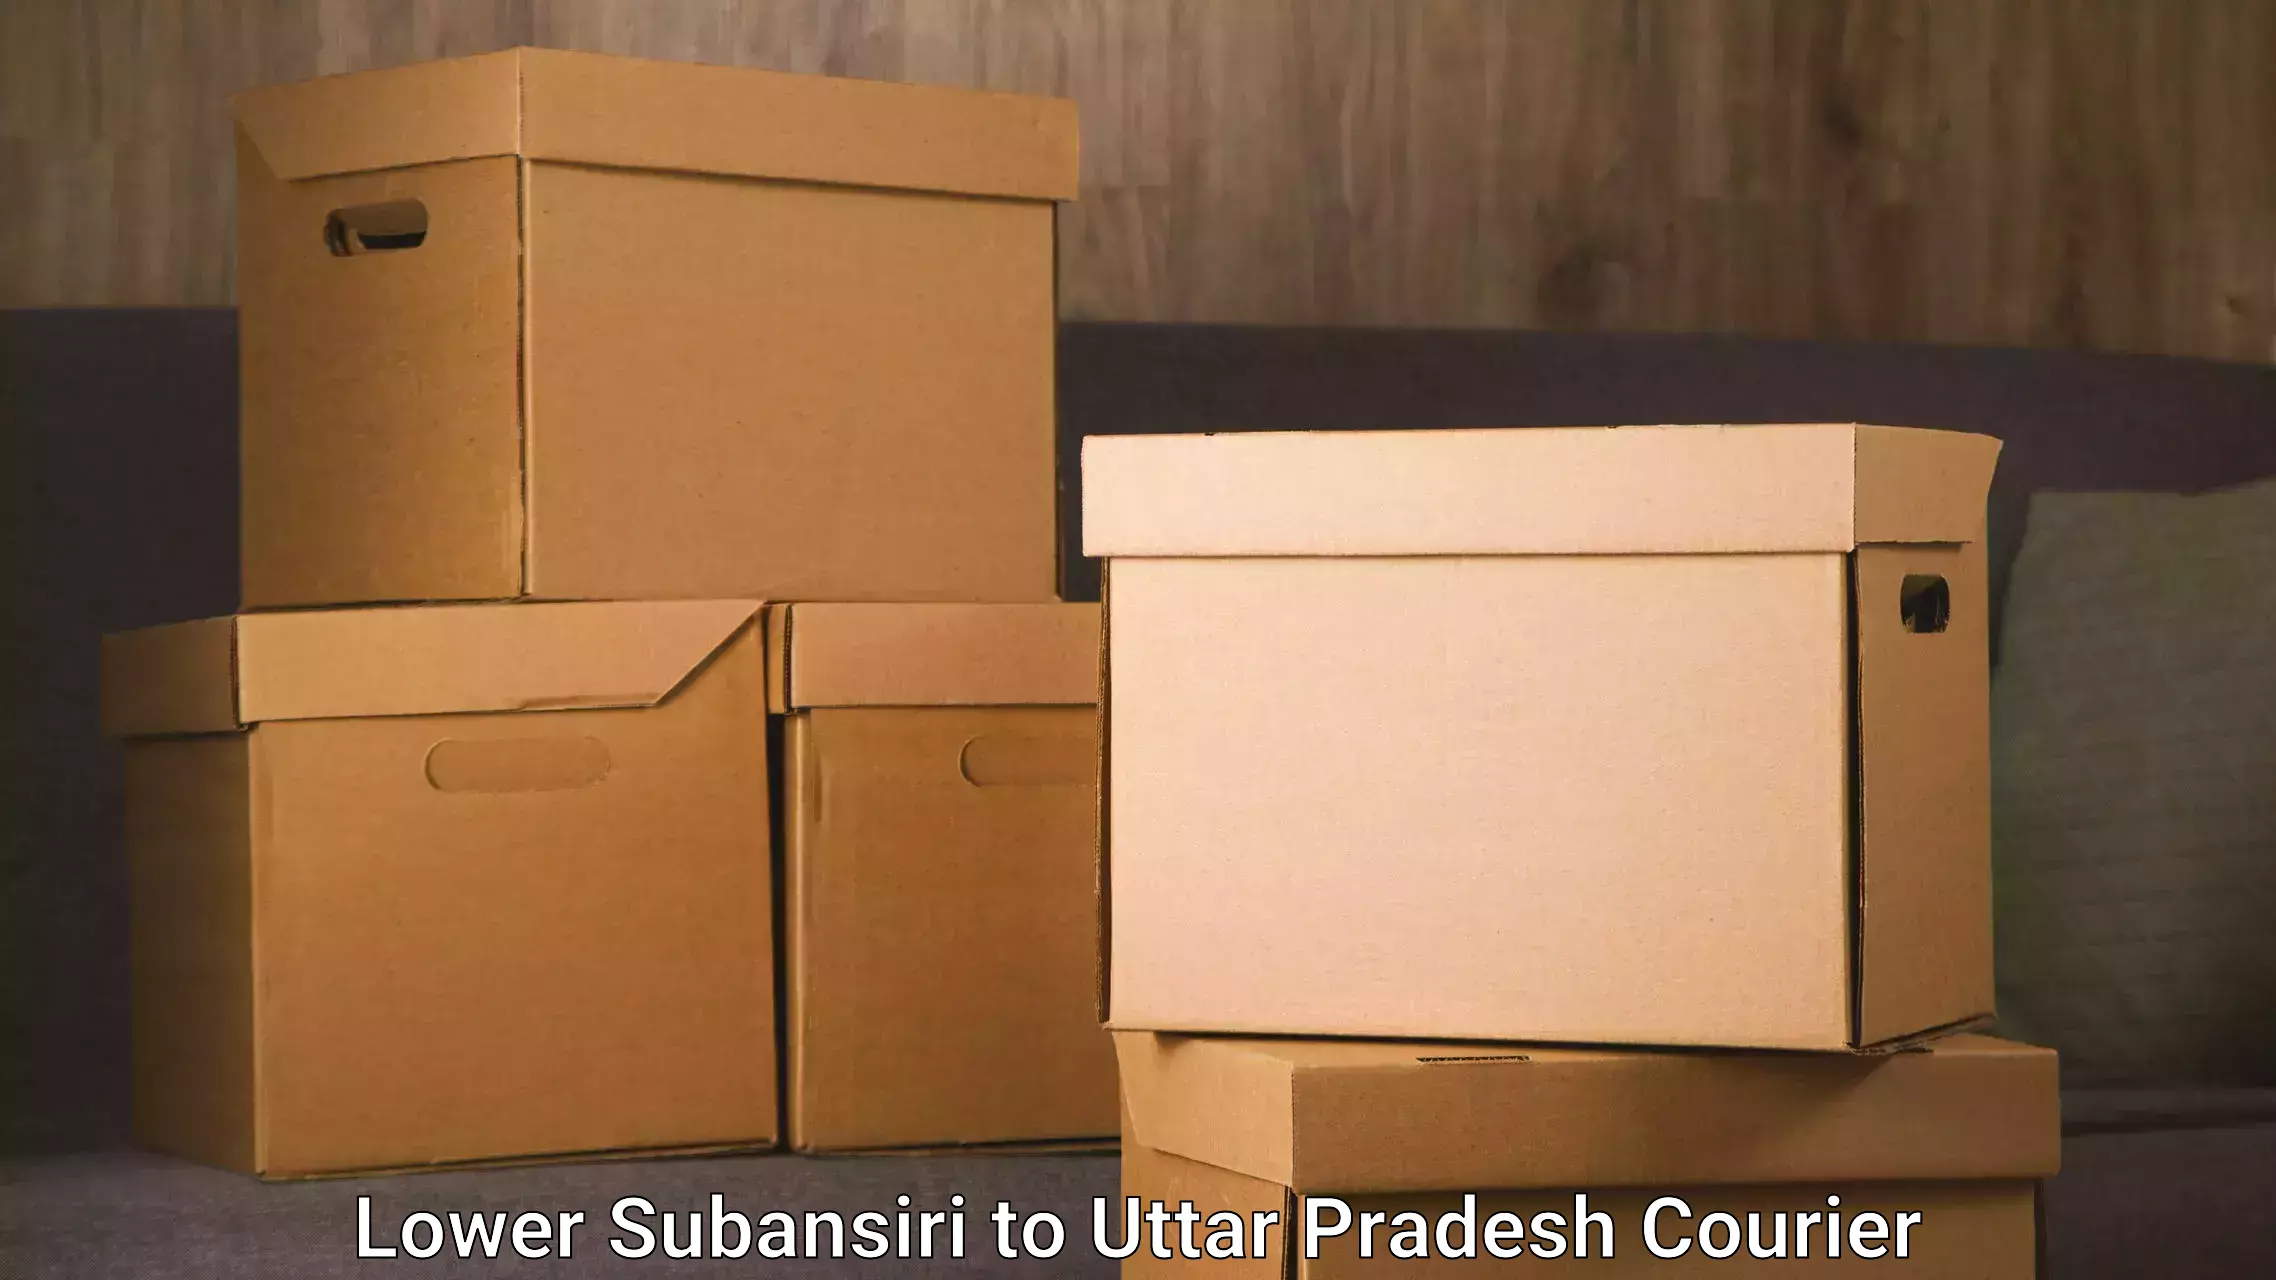 Express delivery solutions Lower Subansiri to Kheragarh